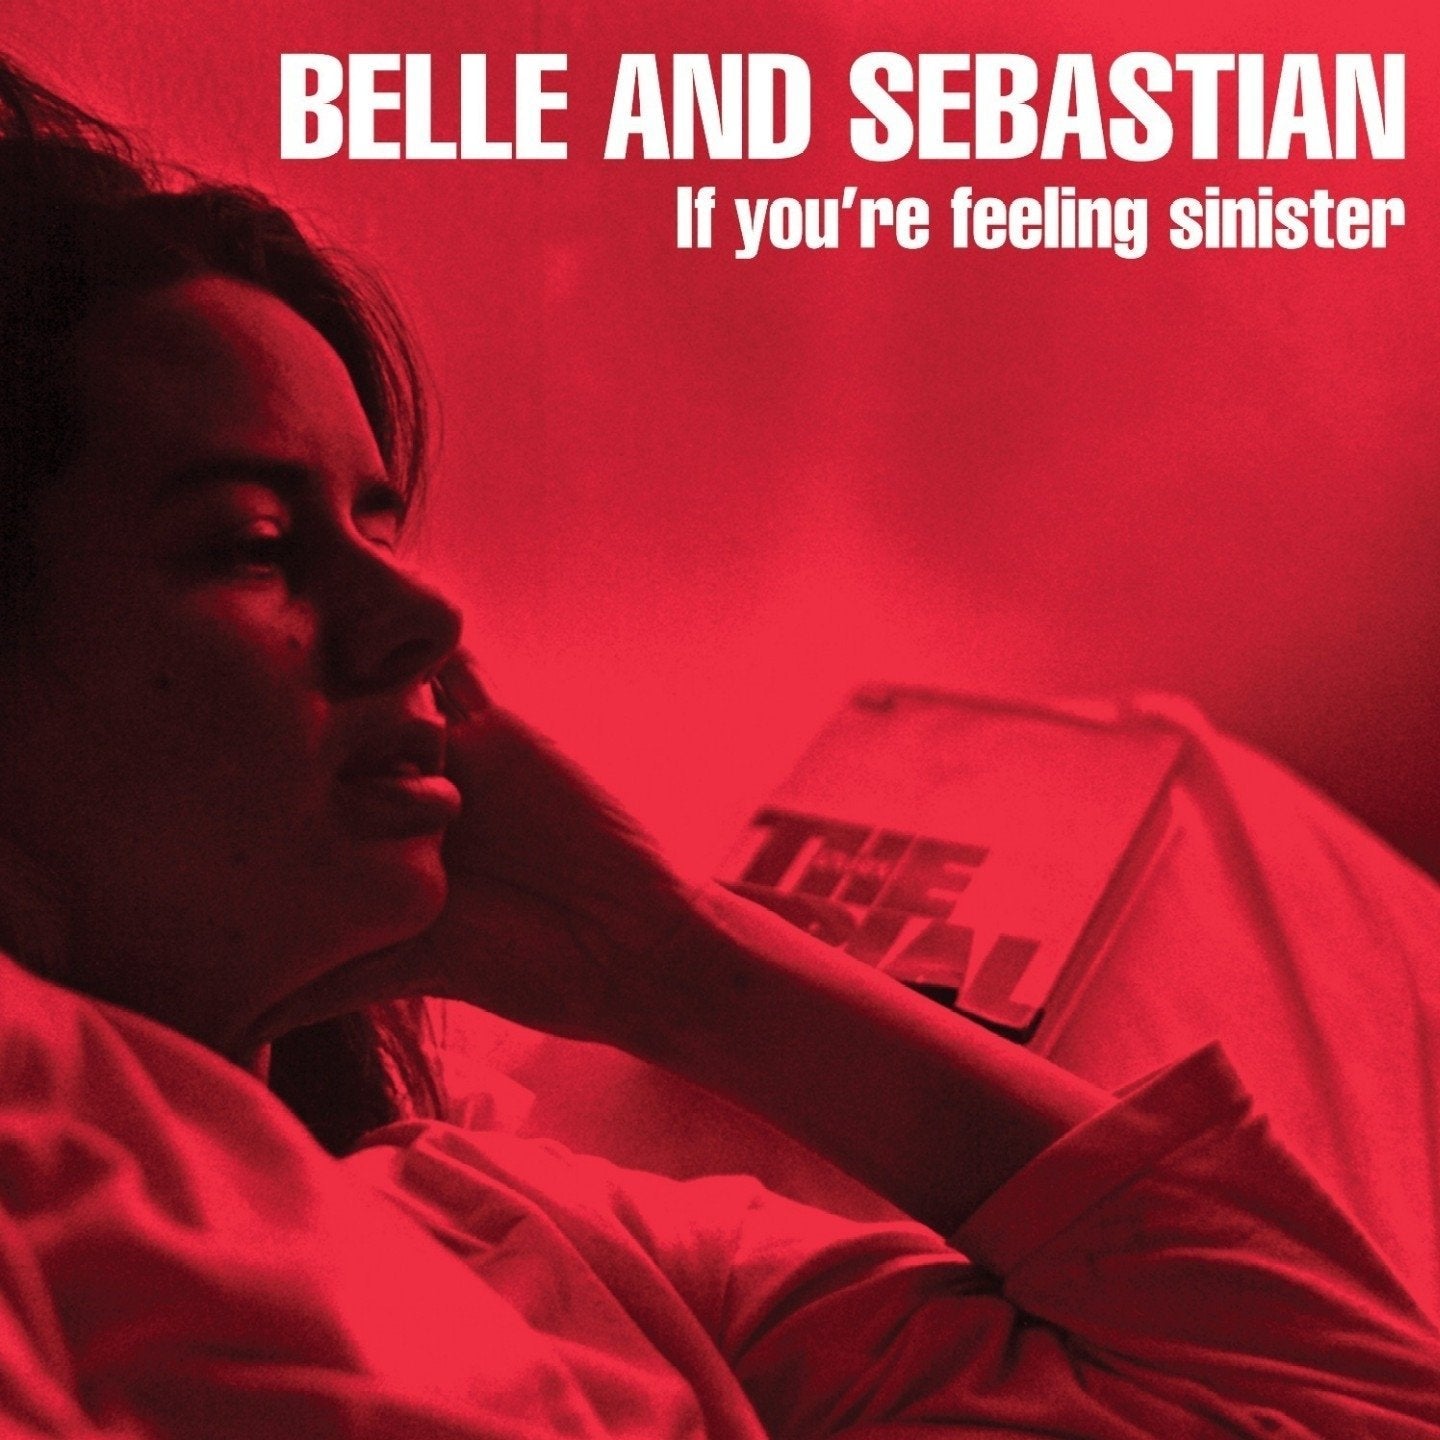 Belle and Sebastian - If You're Feeling Sinister (25th Anniversary Edition Red Vinyl) LP (BF21)